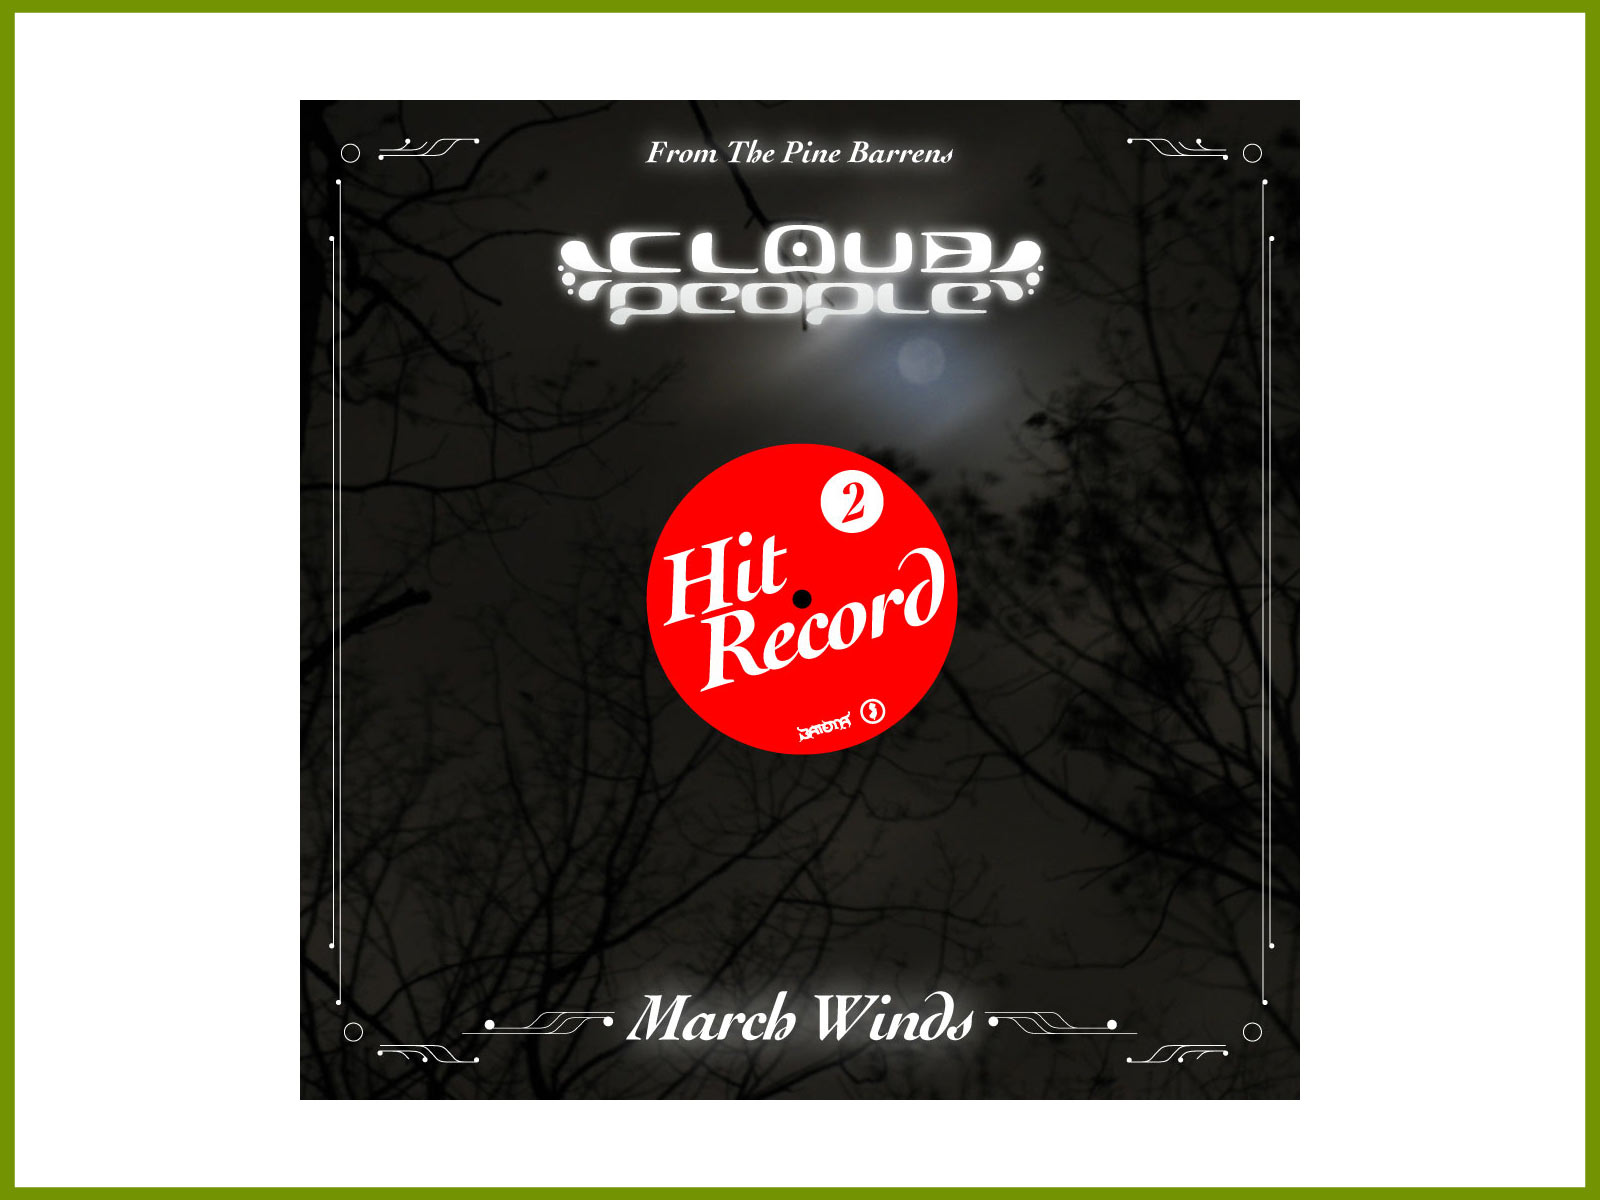 Hear Cloud People’s second Hit Record field recording, “March Winds”